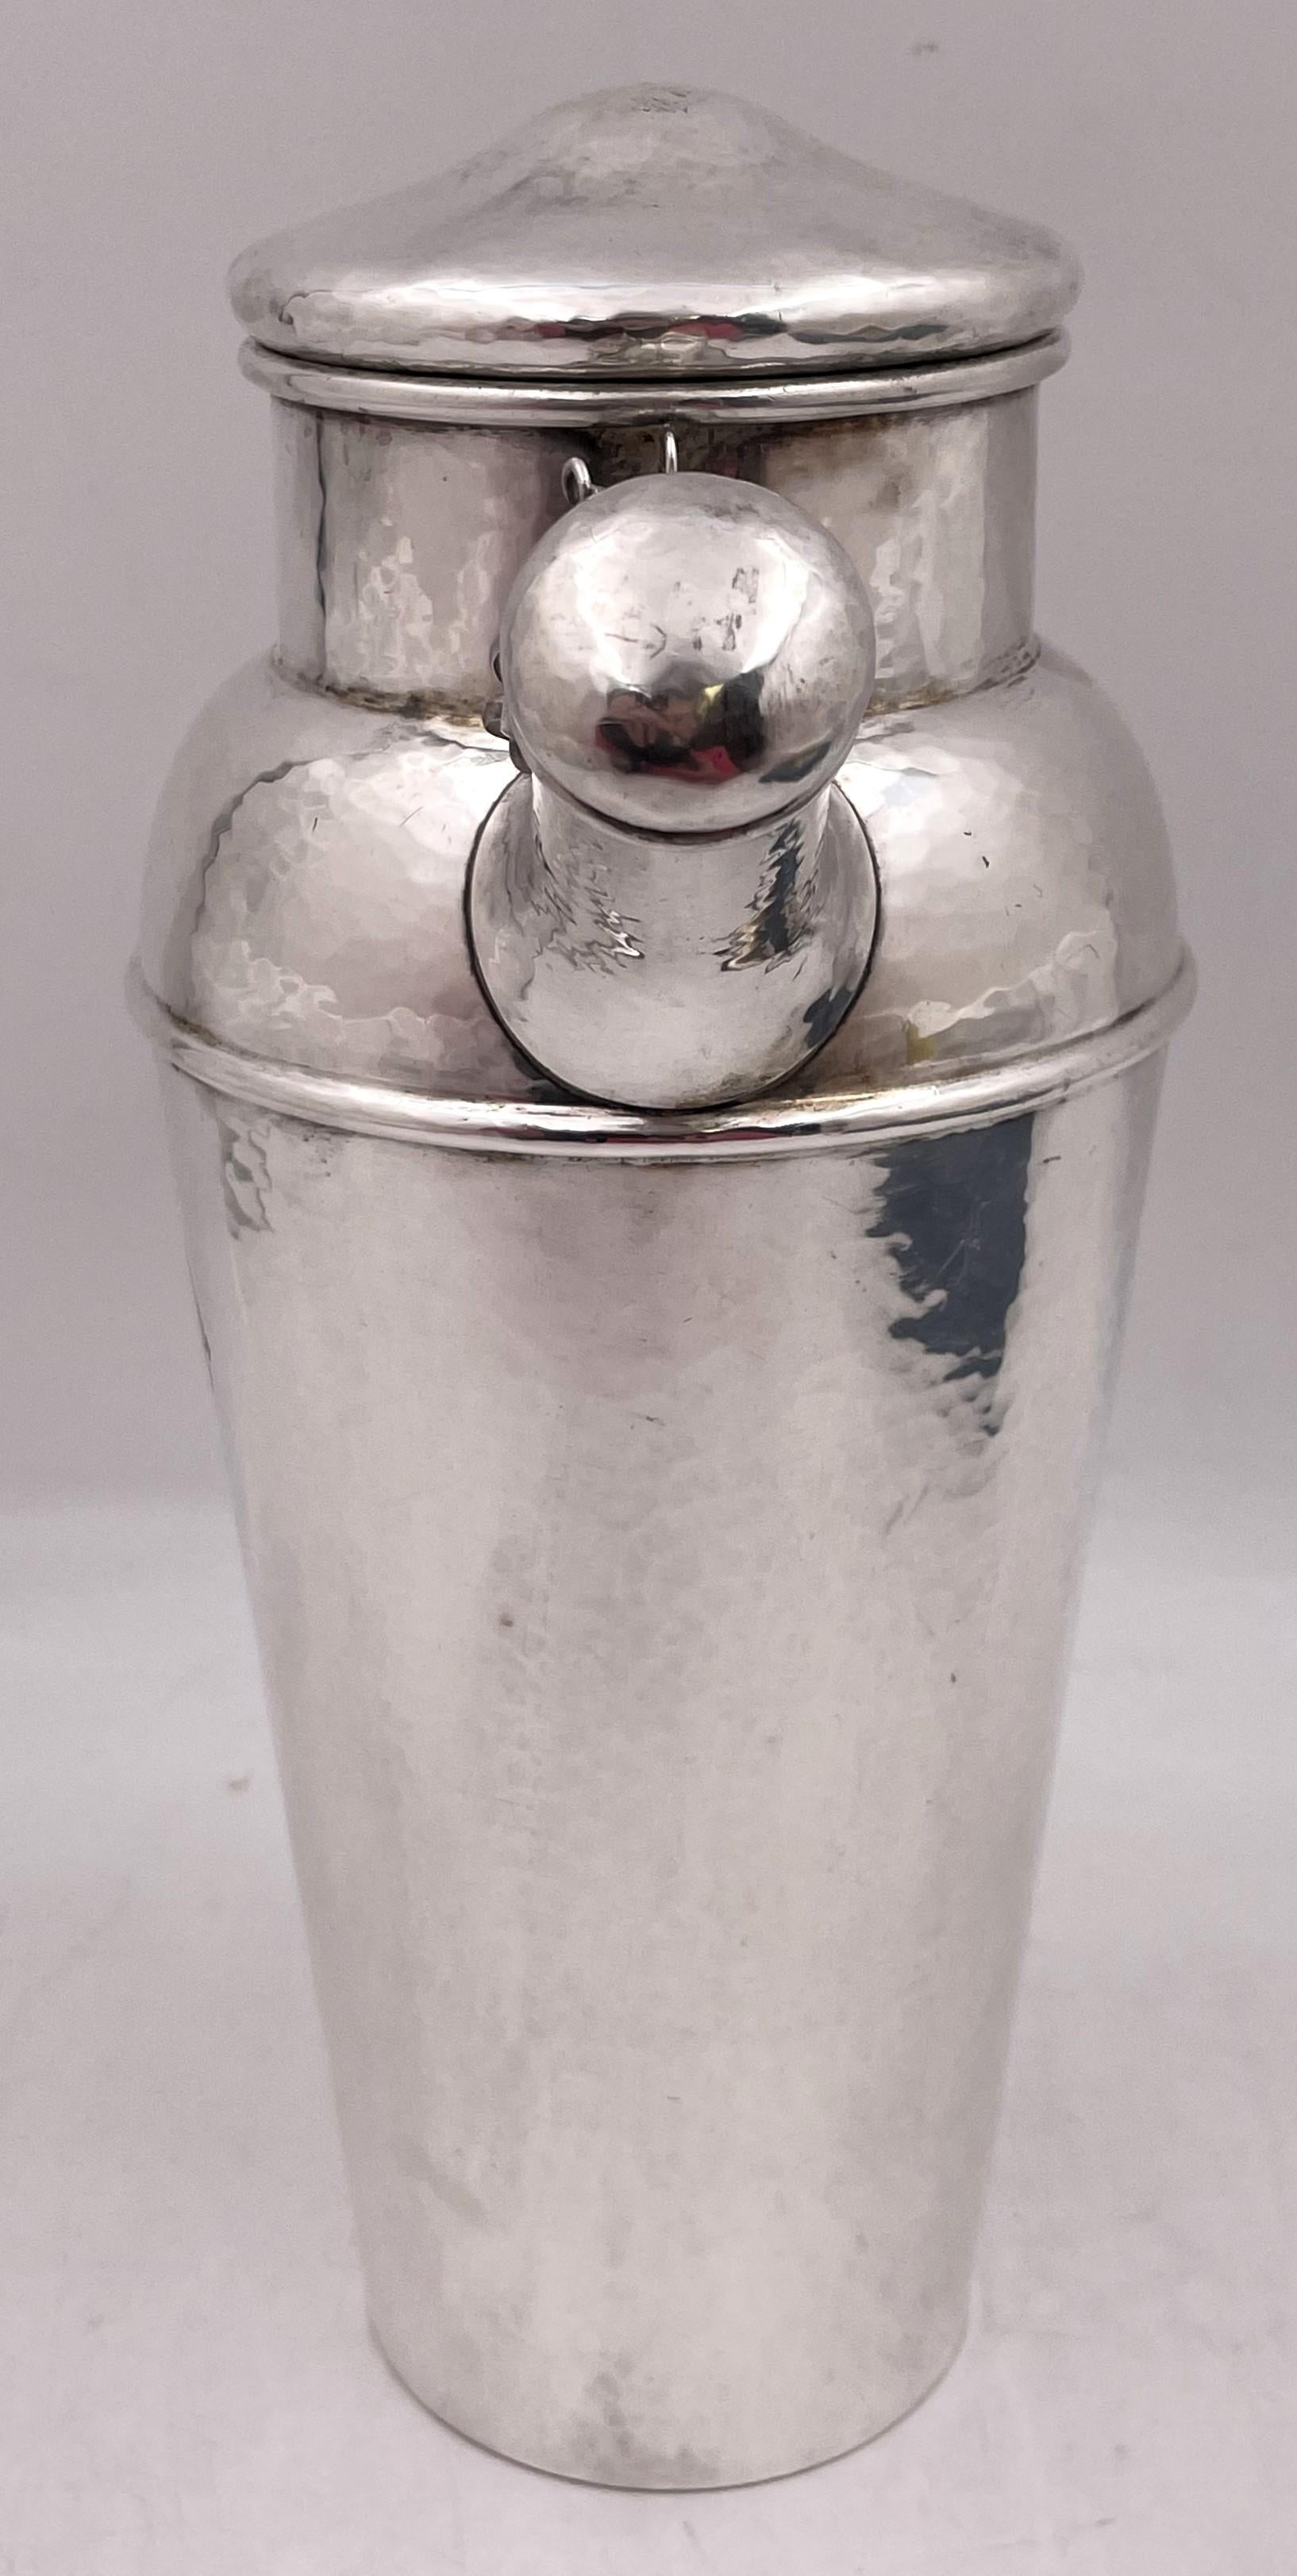 Shreve & Co. sterling silver cocktail shaker from the early 20th century and in Arts & Crafts style, with an elegant, geometric design, all beautifully hand hammered. It measures 10 1/4'' in height by 7 2/3'' from handle to spout by 4 1/2'' in